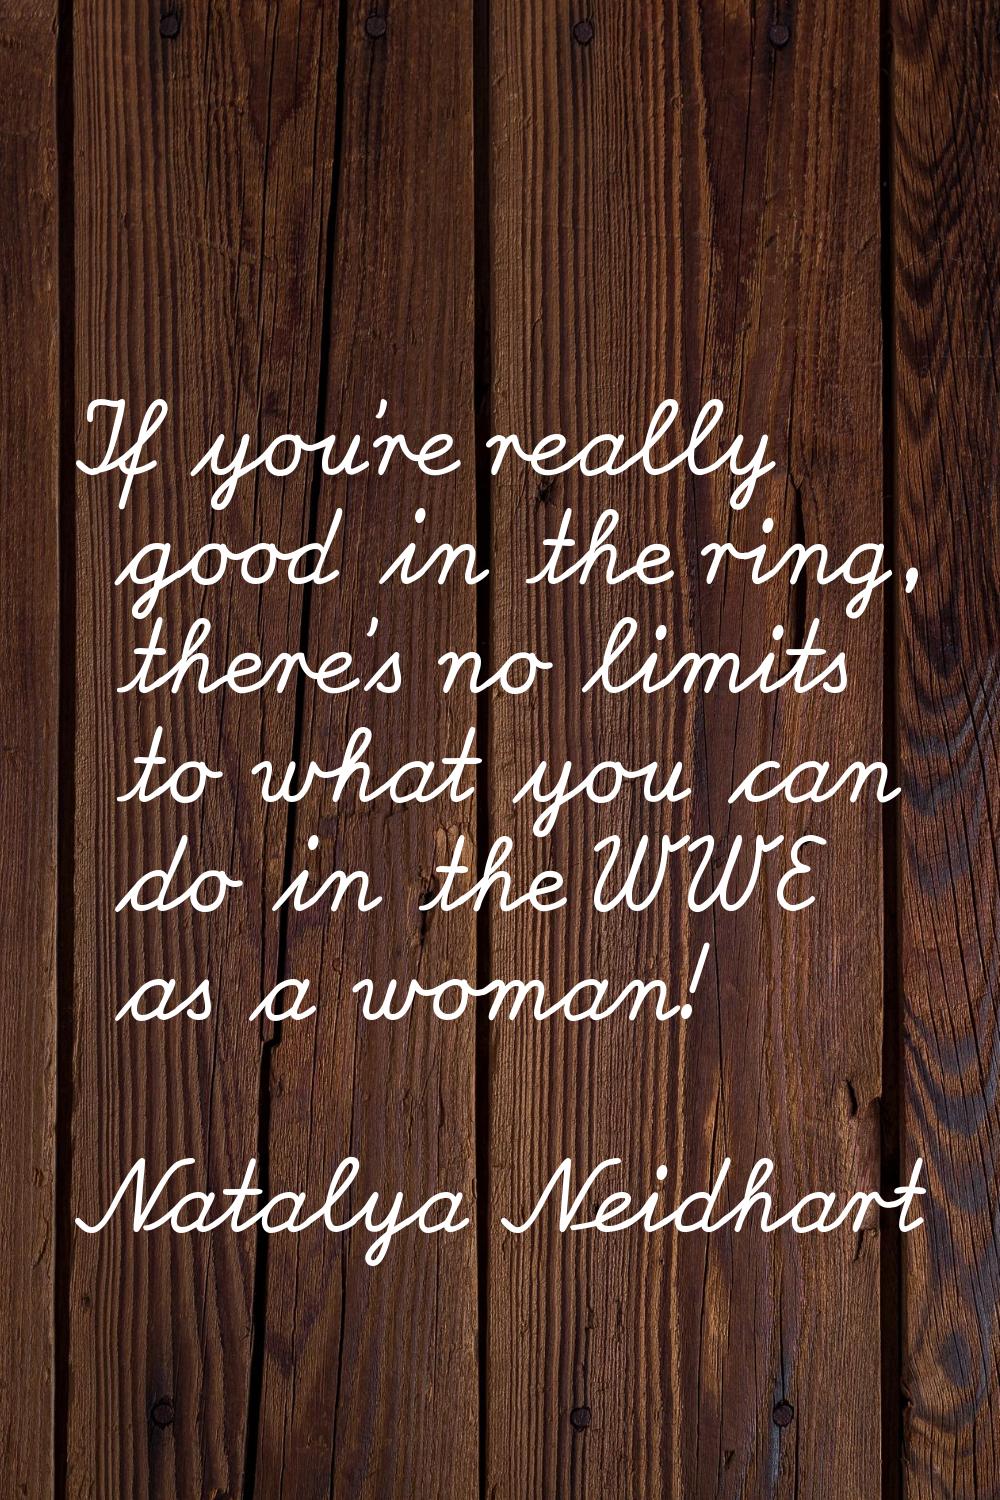 If you're really good in the ring, there's no limits to what you can do in the WWE as a woman!